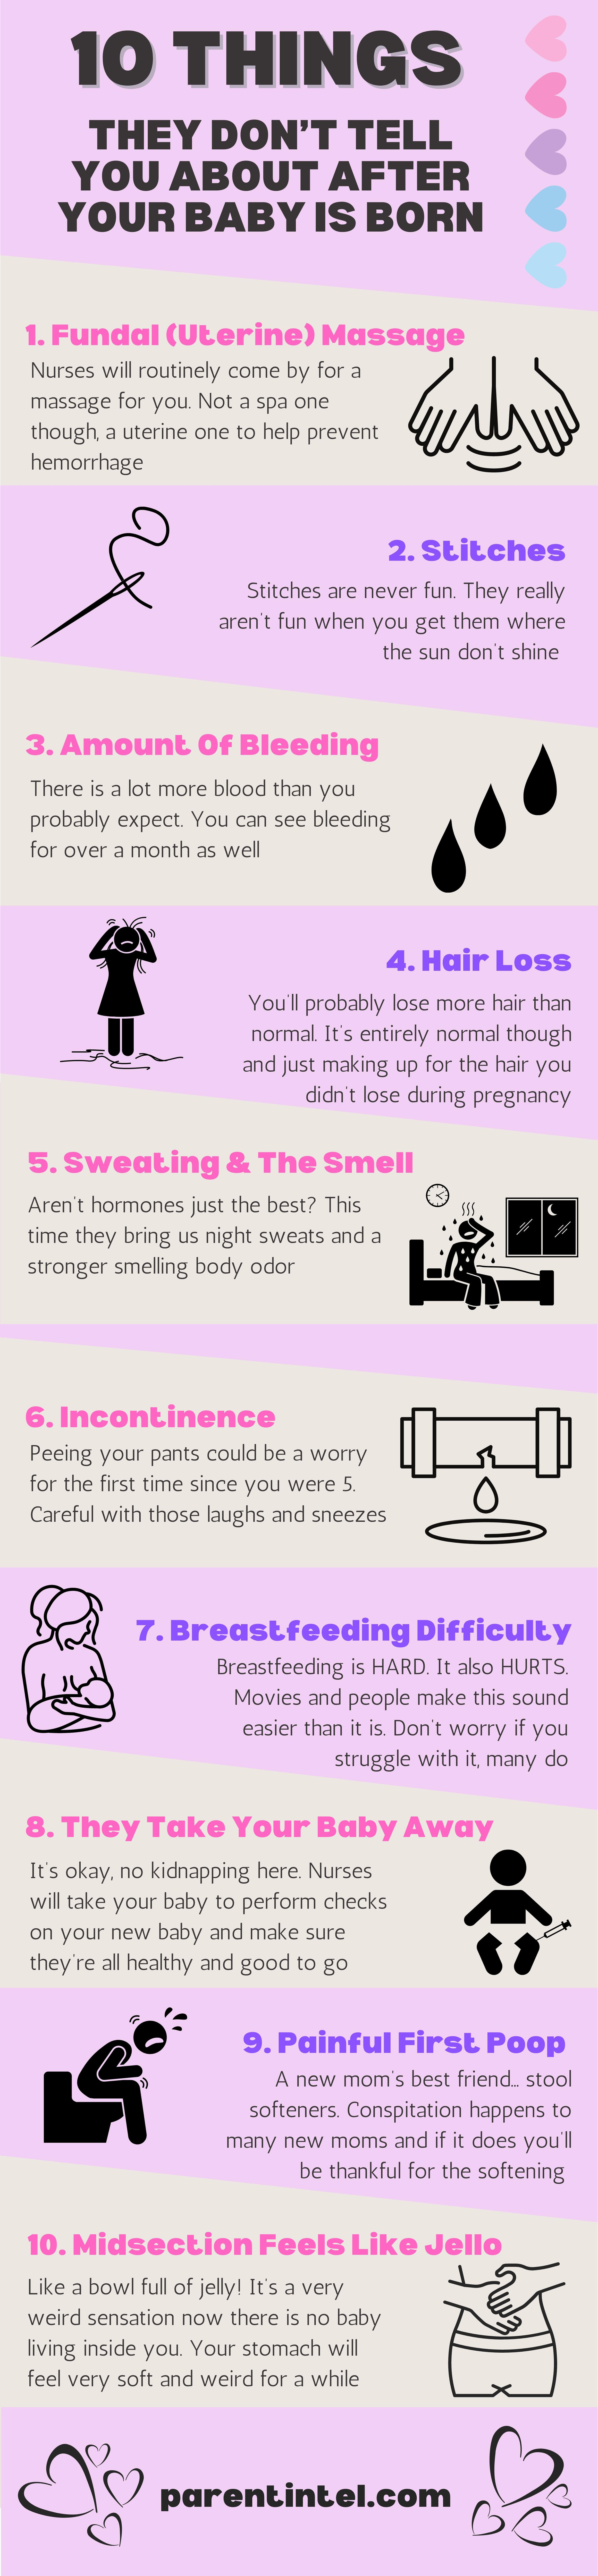 10 Things they don't tell you about after your baby is born infographic